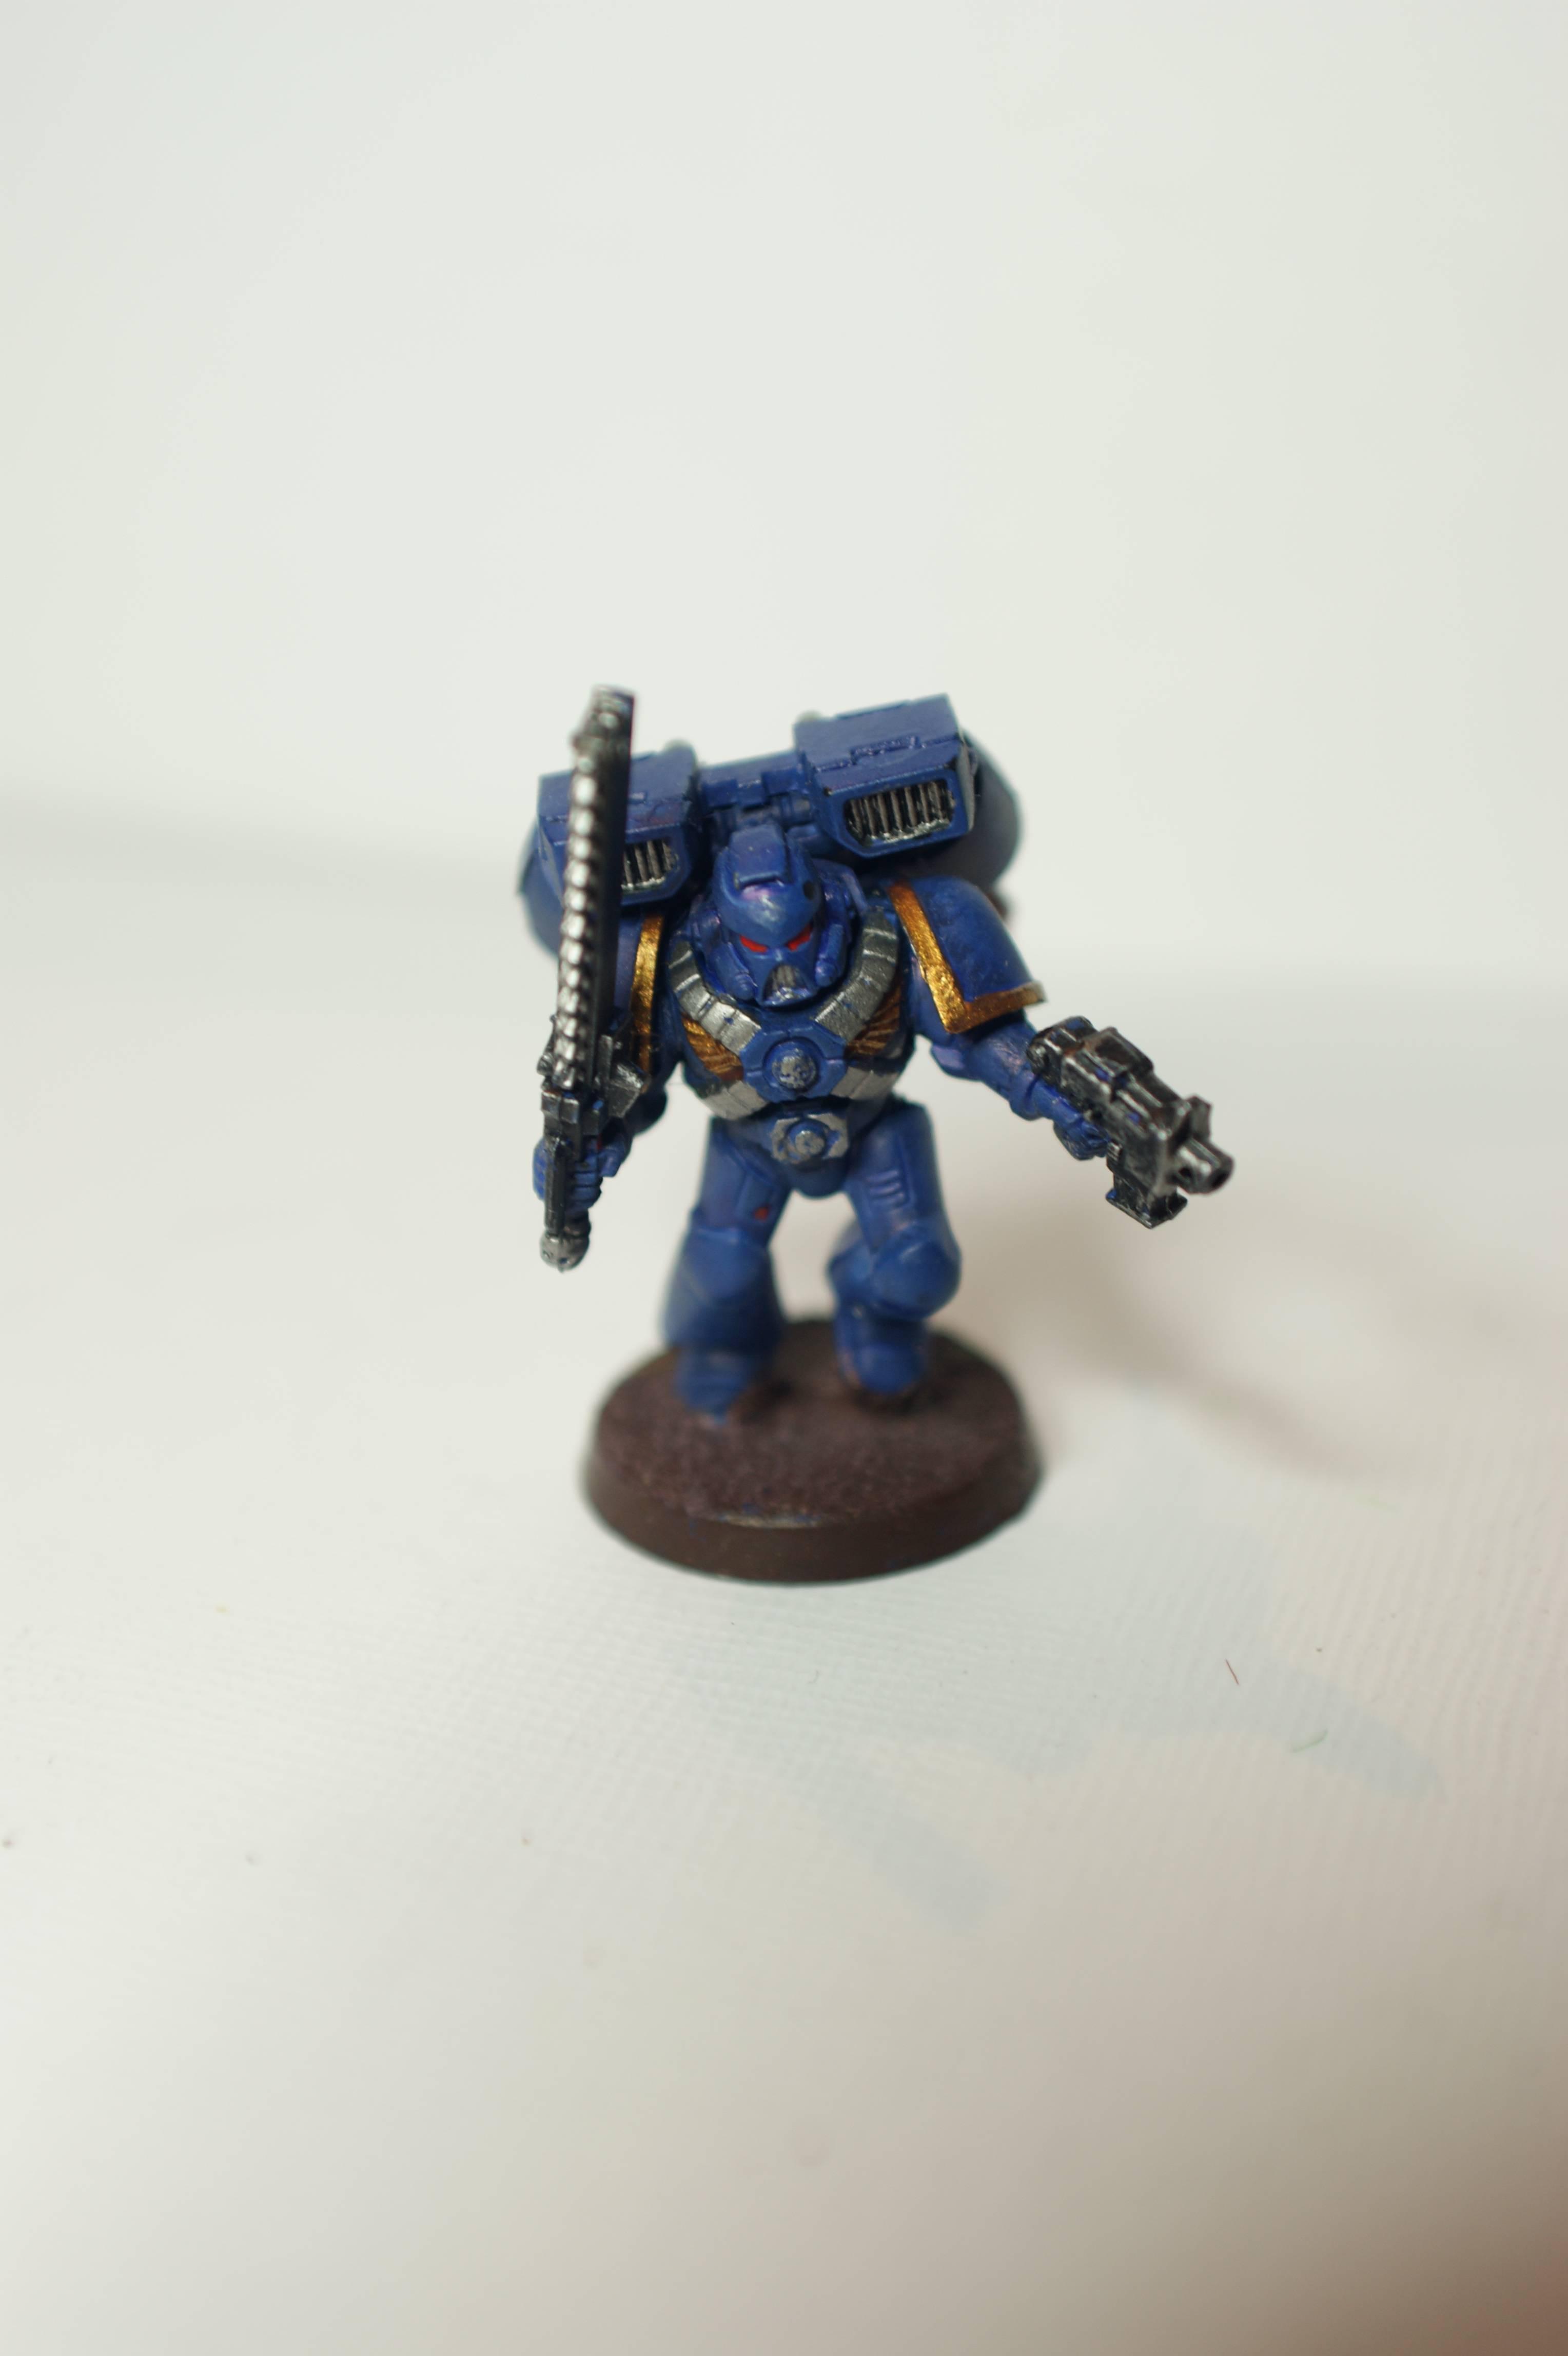 Assault marine with jet flames